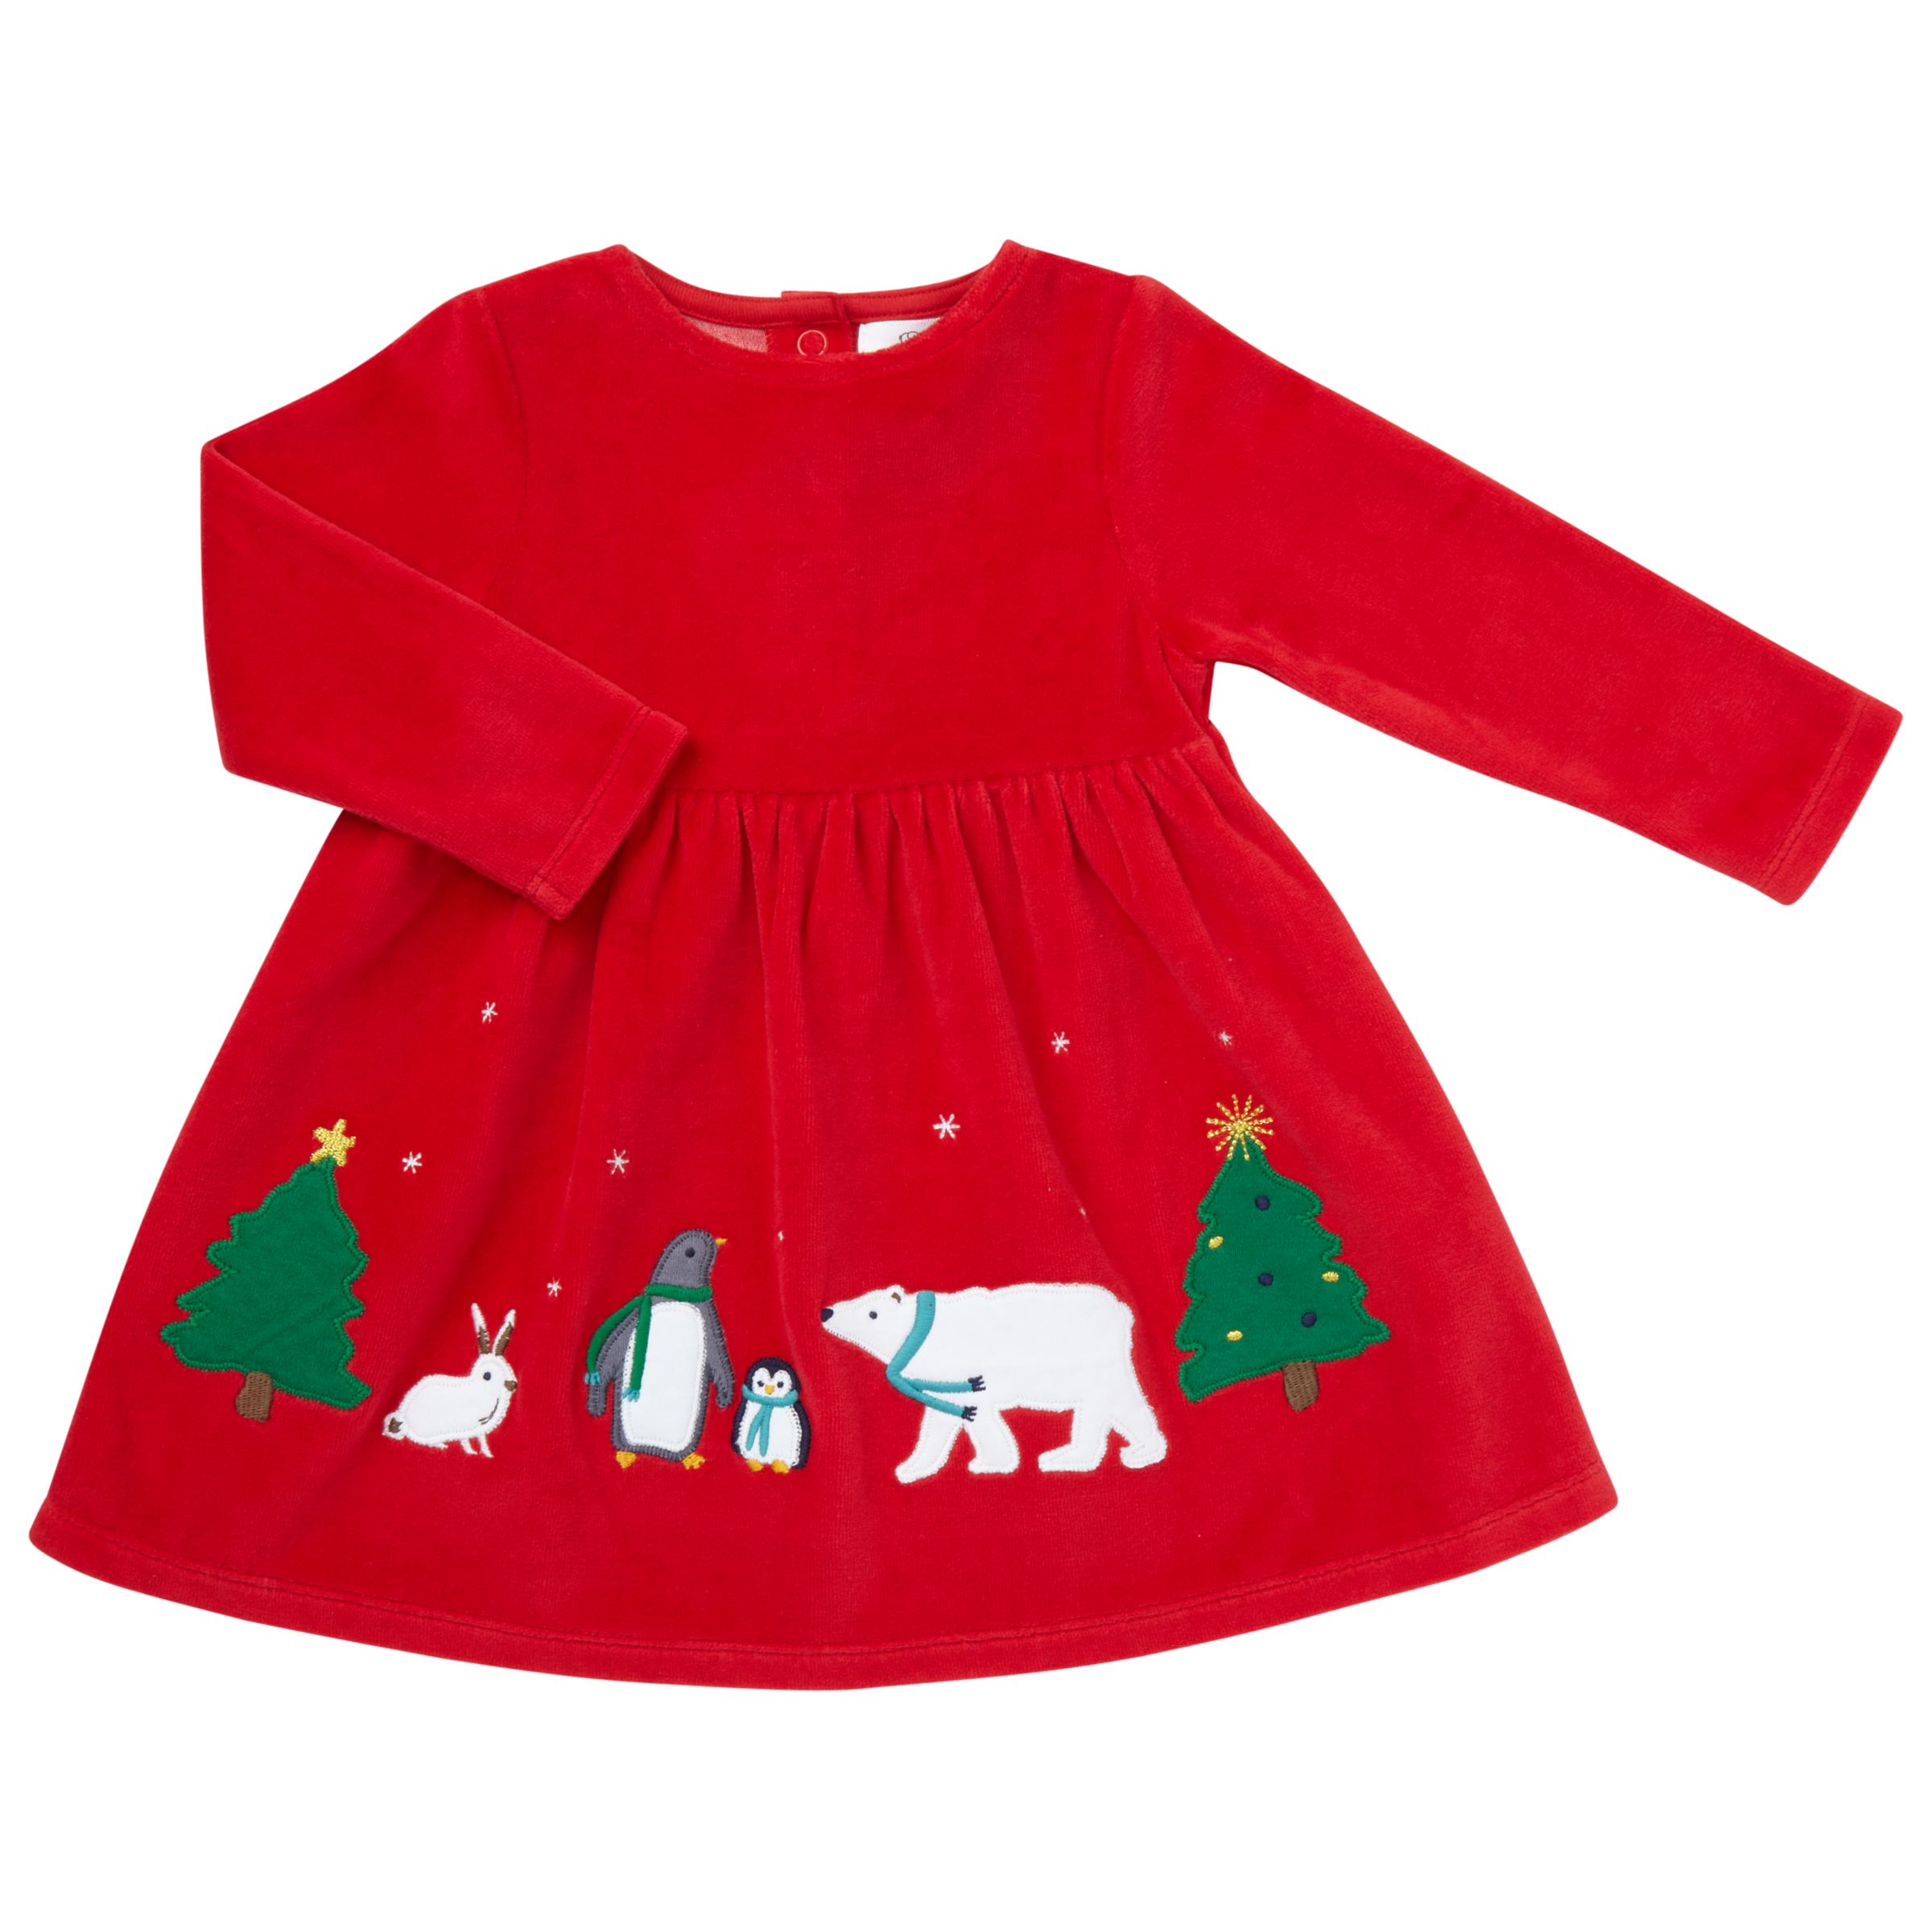 9 month old christmas dress